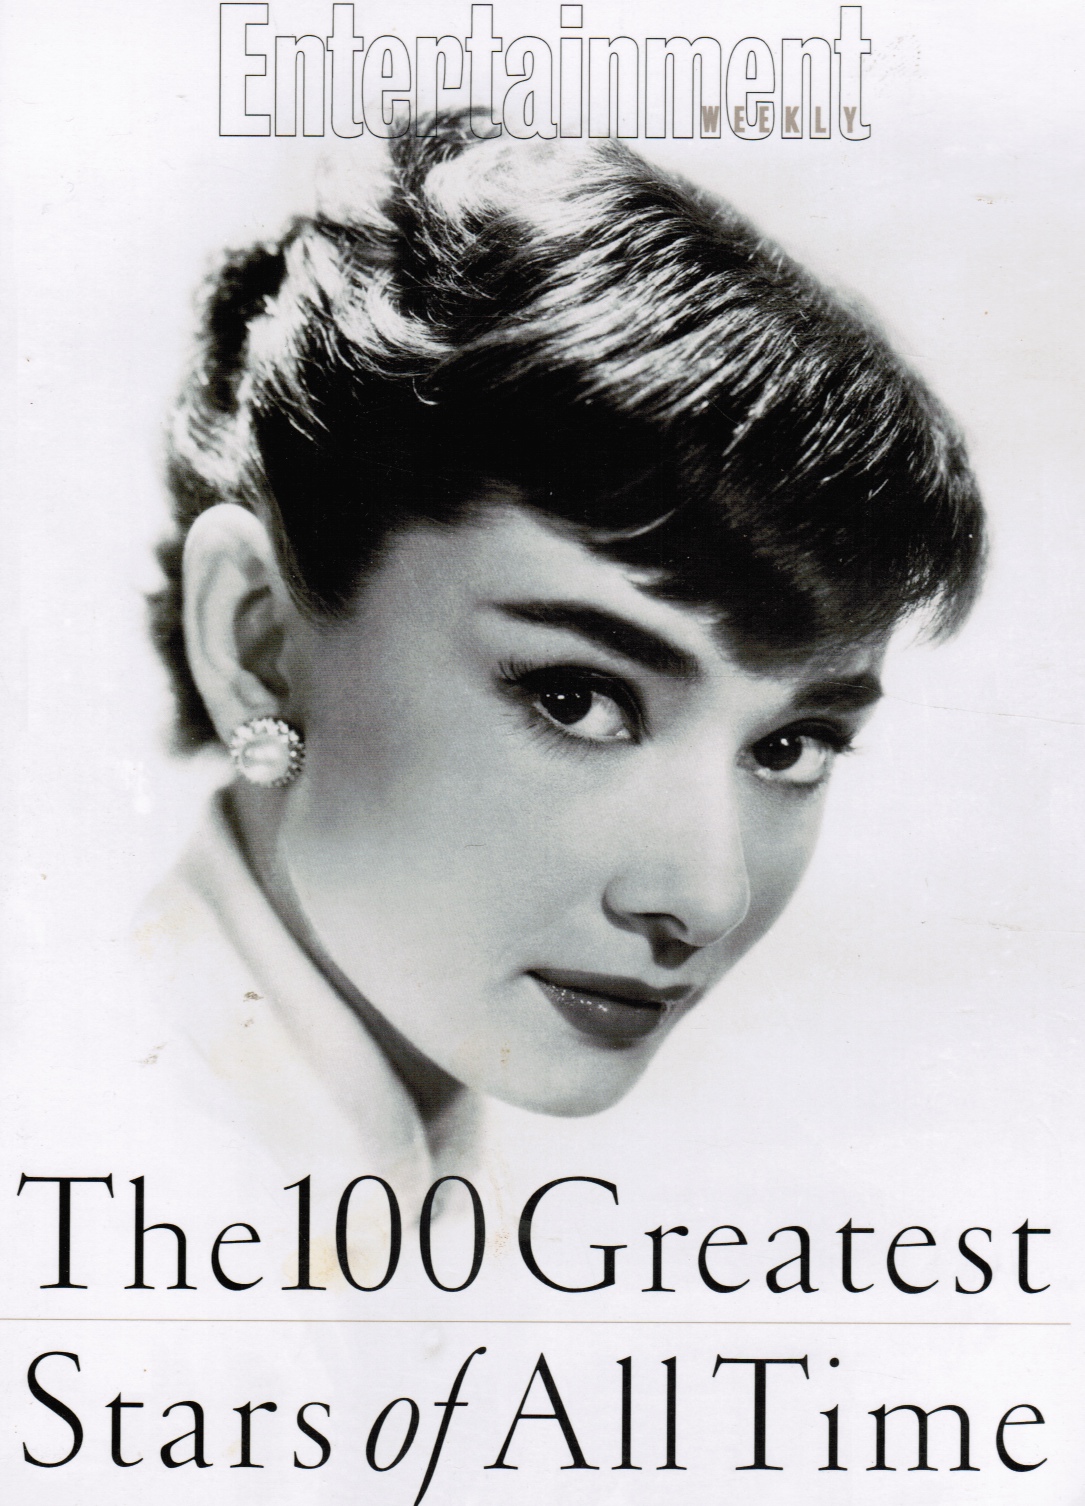 BURR, TY & INC. ENTERTAINMENT WEEKLY & GWINN. ALISON - The 100 Greatest Stars of All Time